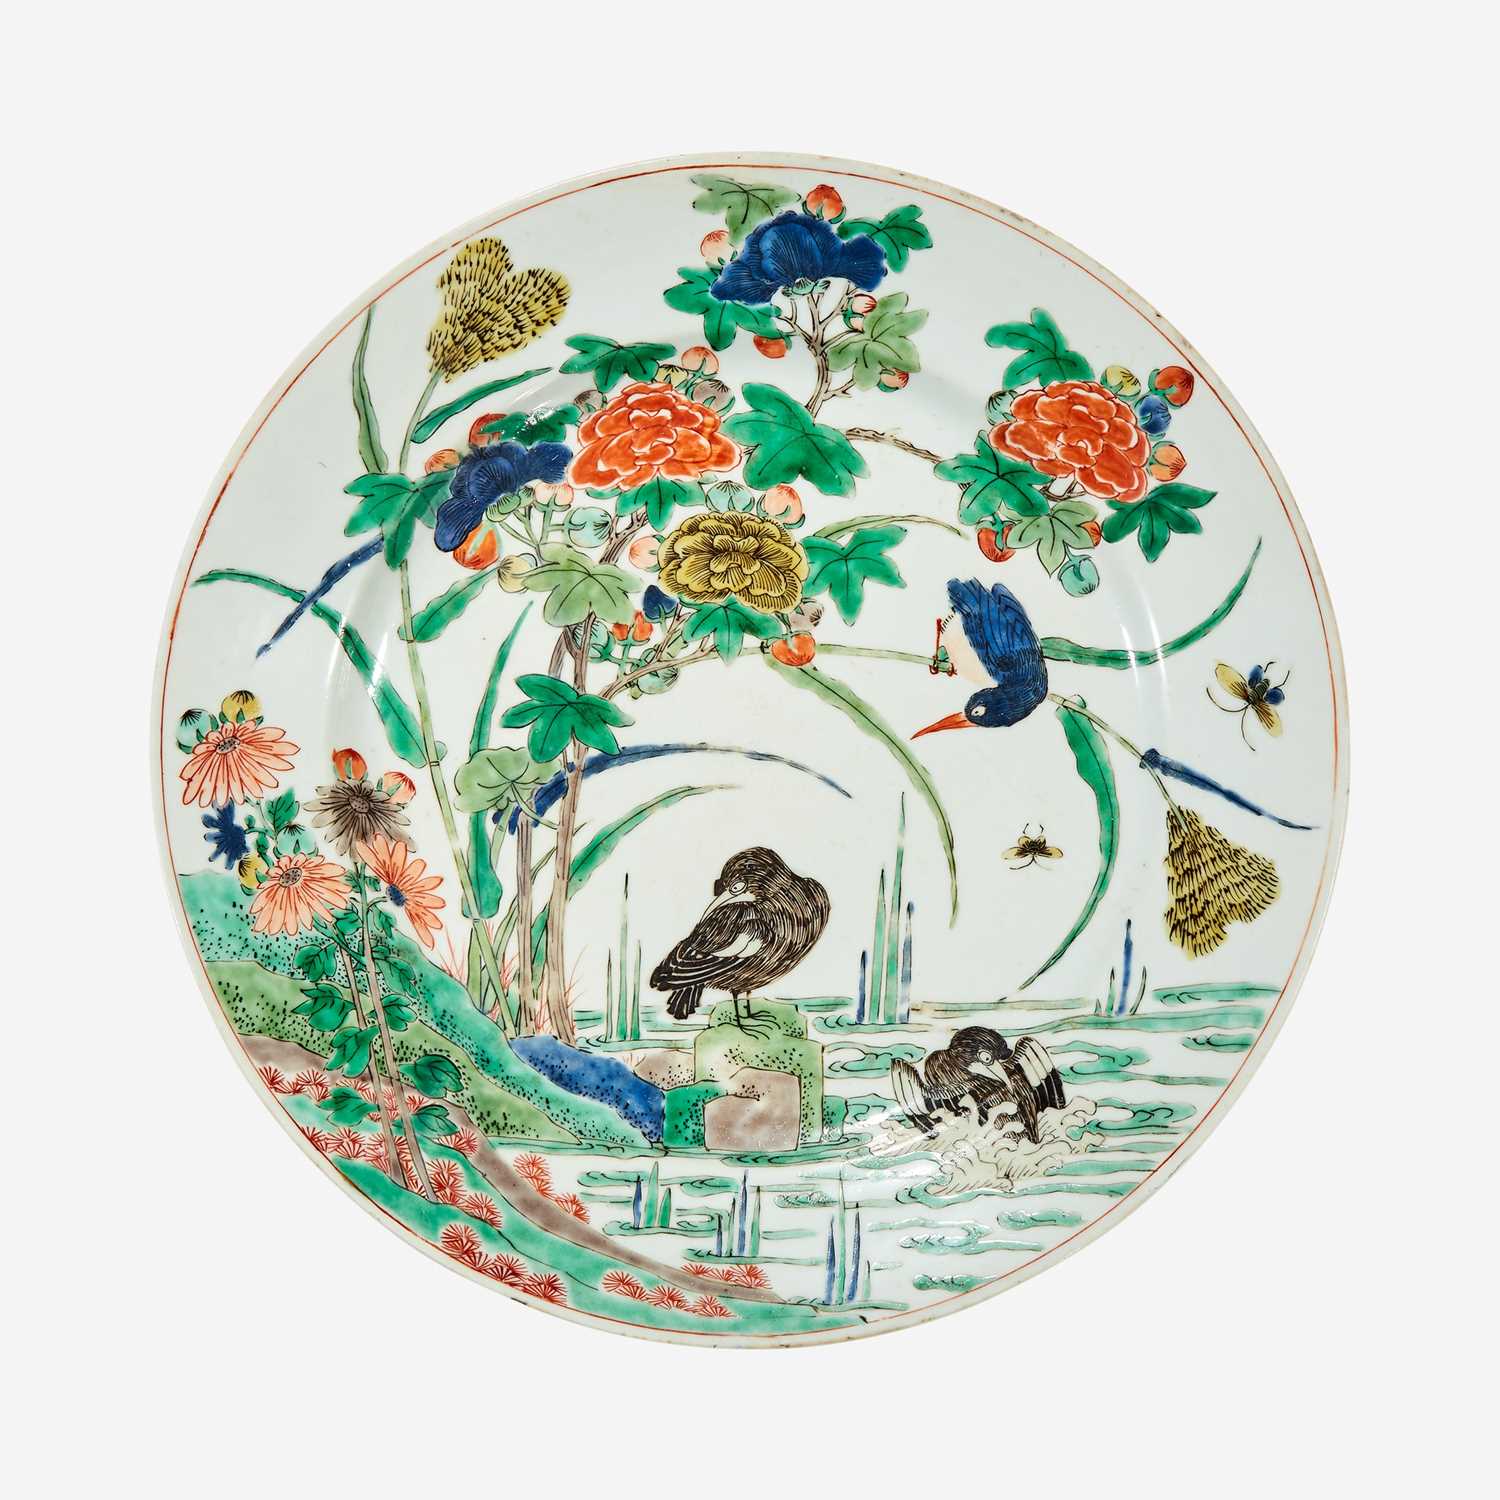 Lot 64 - A Chinese famille verte-decorated porcelain "Waterfowl" dish